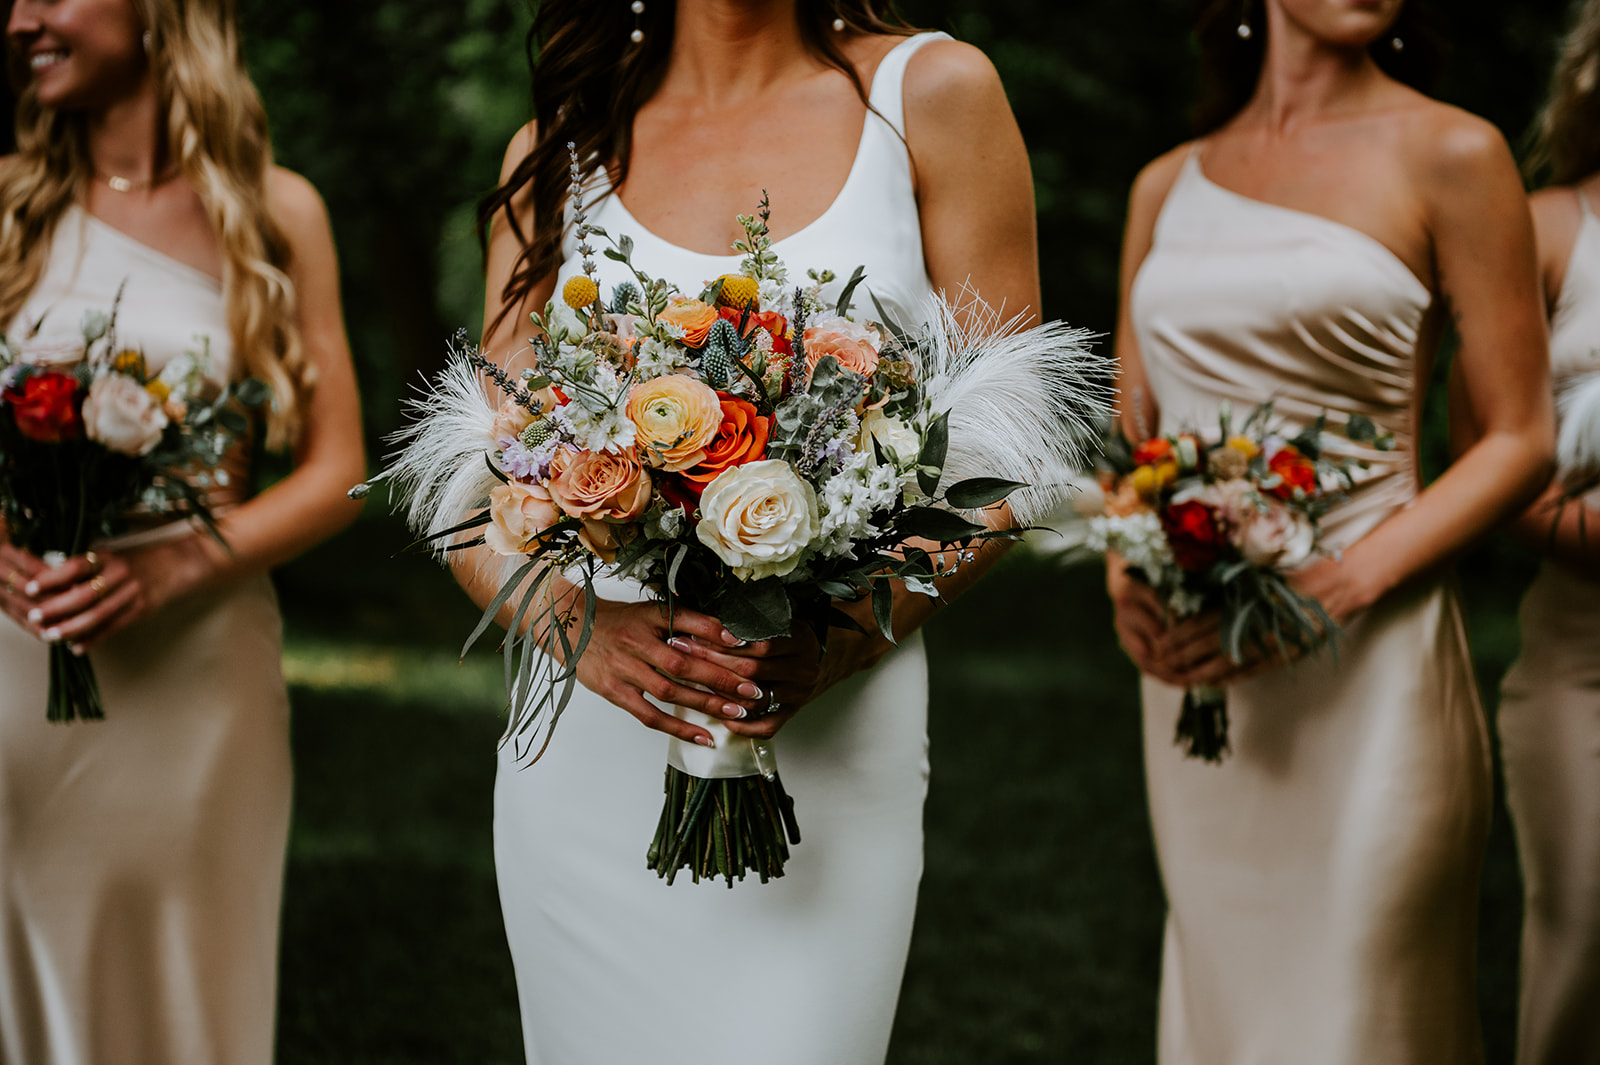 Bride and bridesmaids with colorful bouquets with ostrich feathers and beige dresses